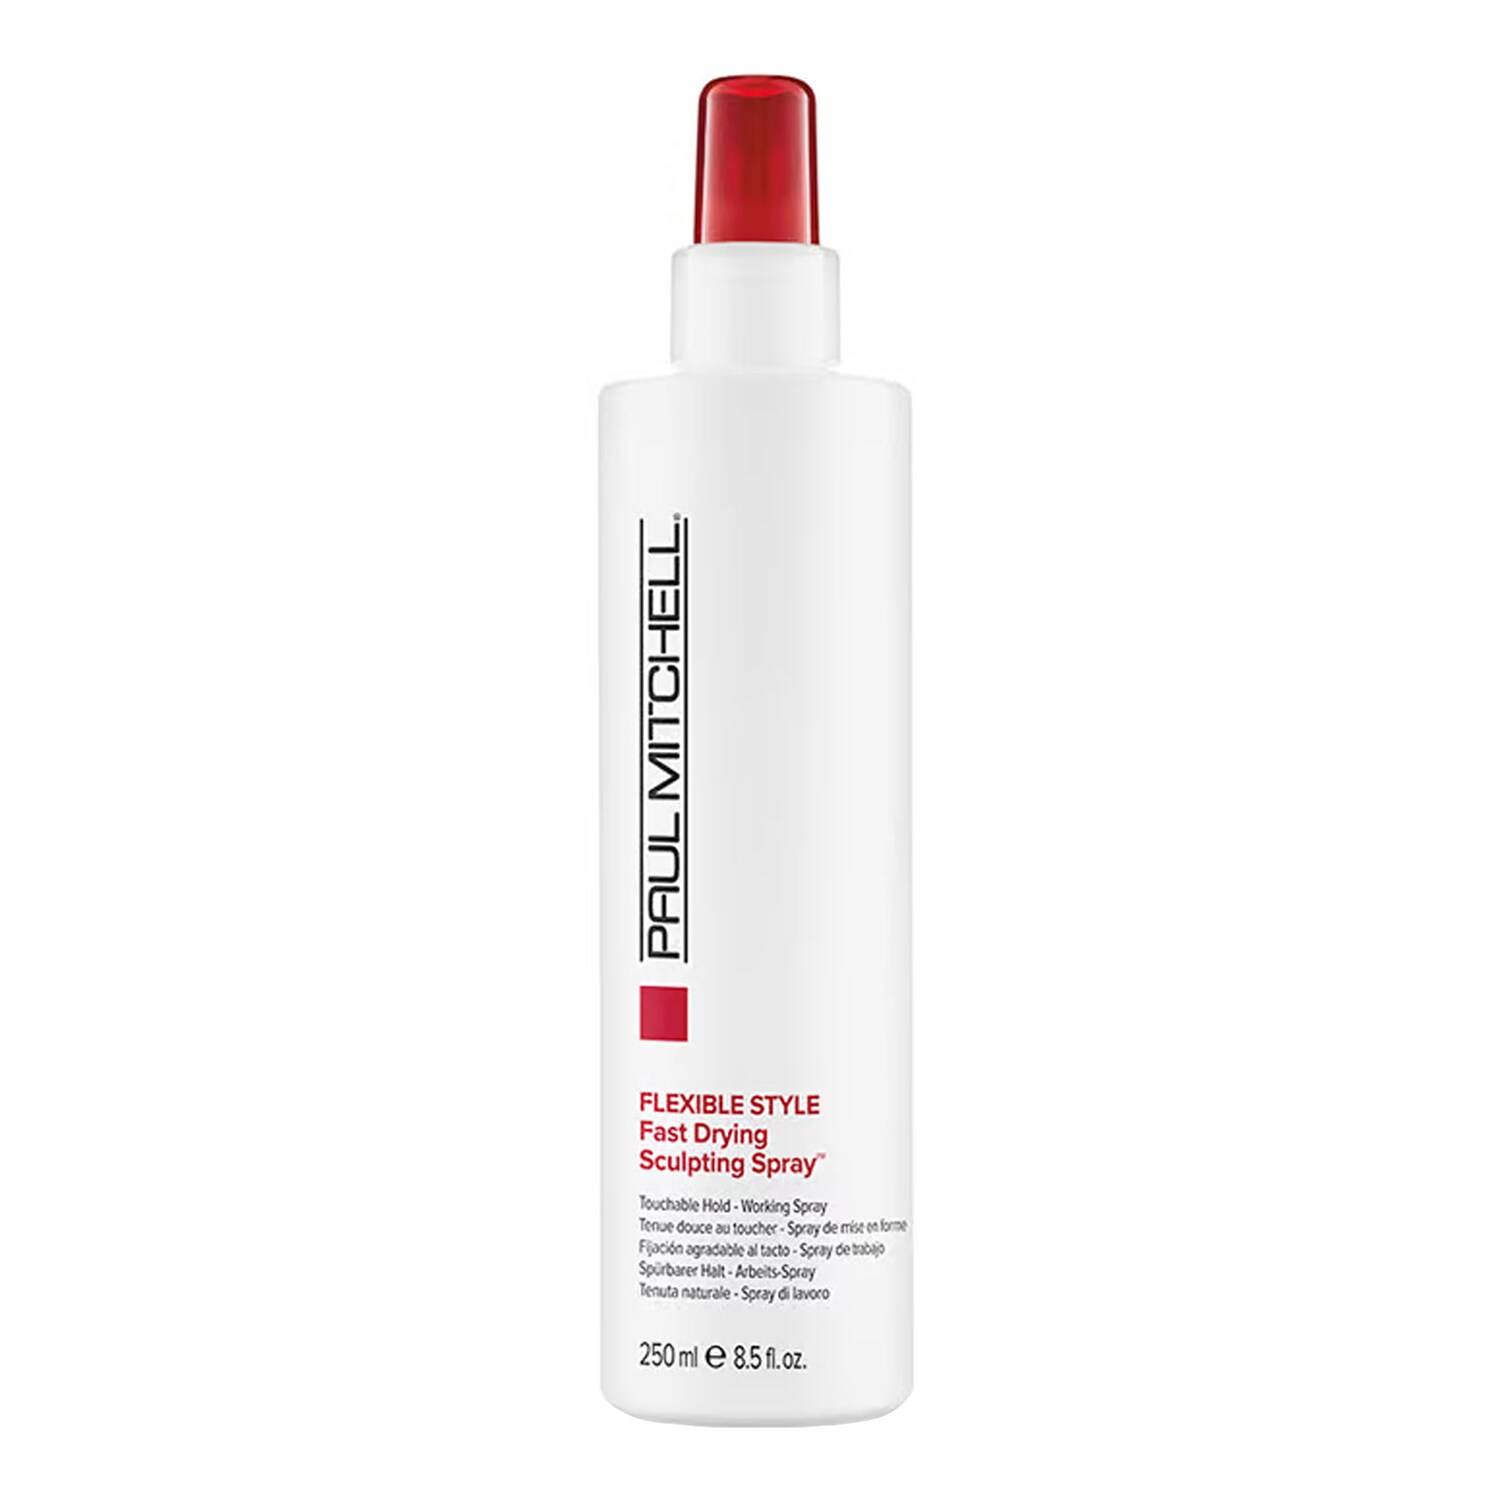 Paul Mitchell Flexible Style Fast Drying Sculpting Spray 250Ml